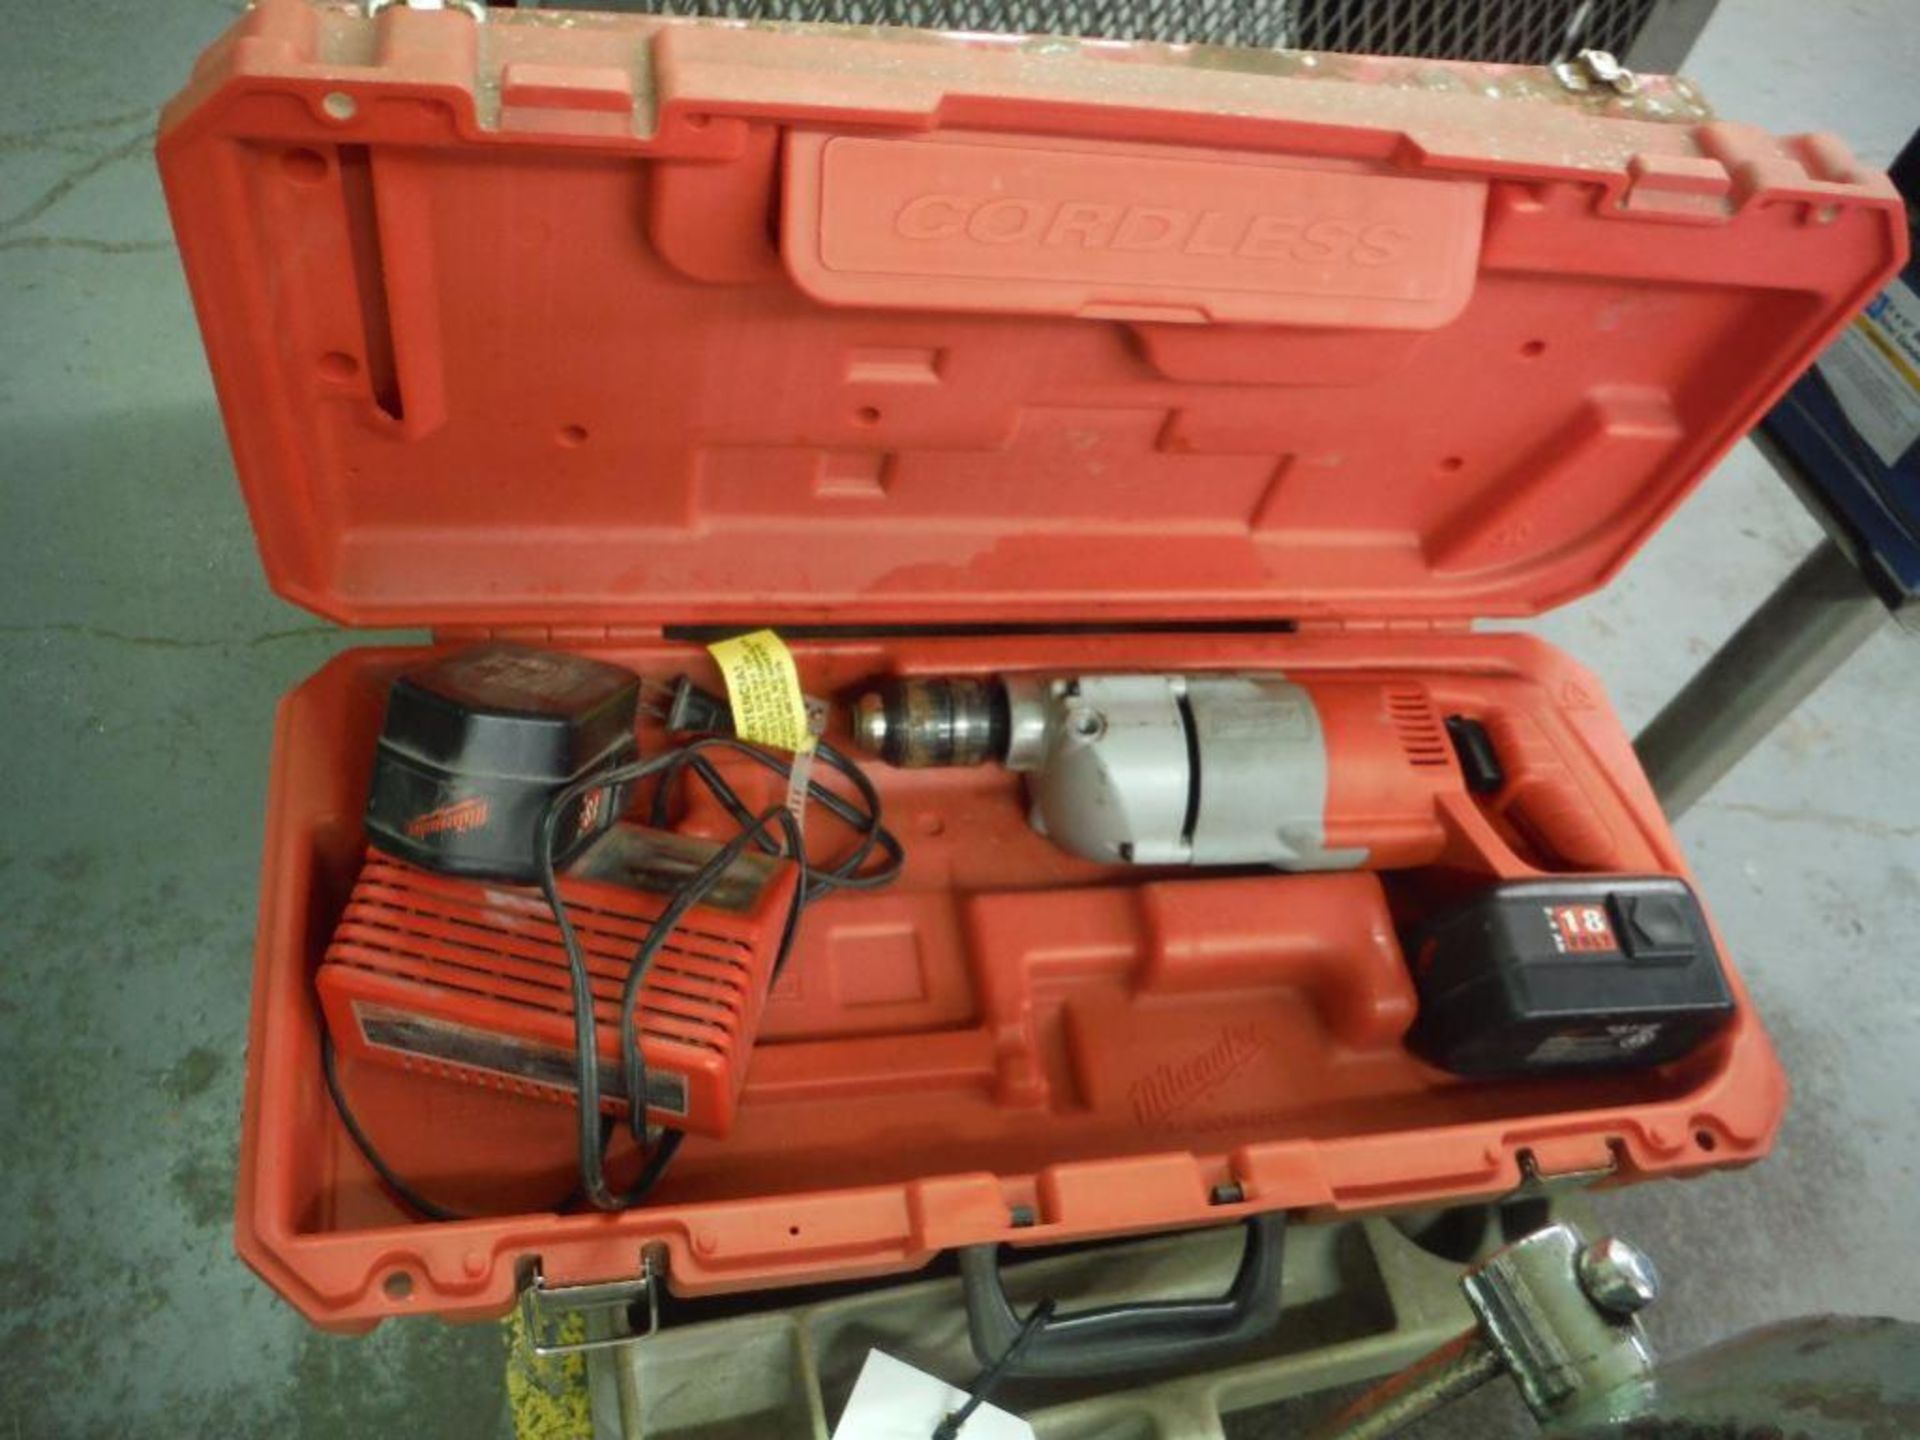 Milwaukee 18 volt cordless 1/2 in. heavy duty drill, 2 batteries, charger, plastic case ** Rigging